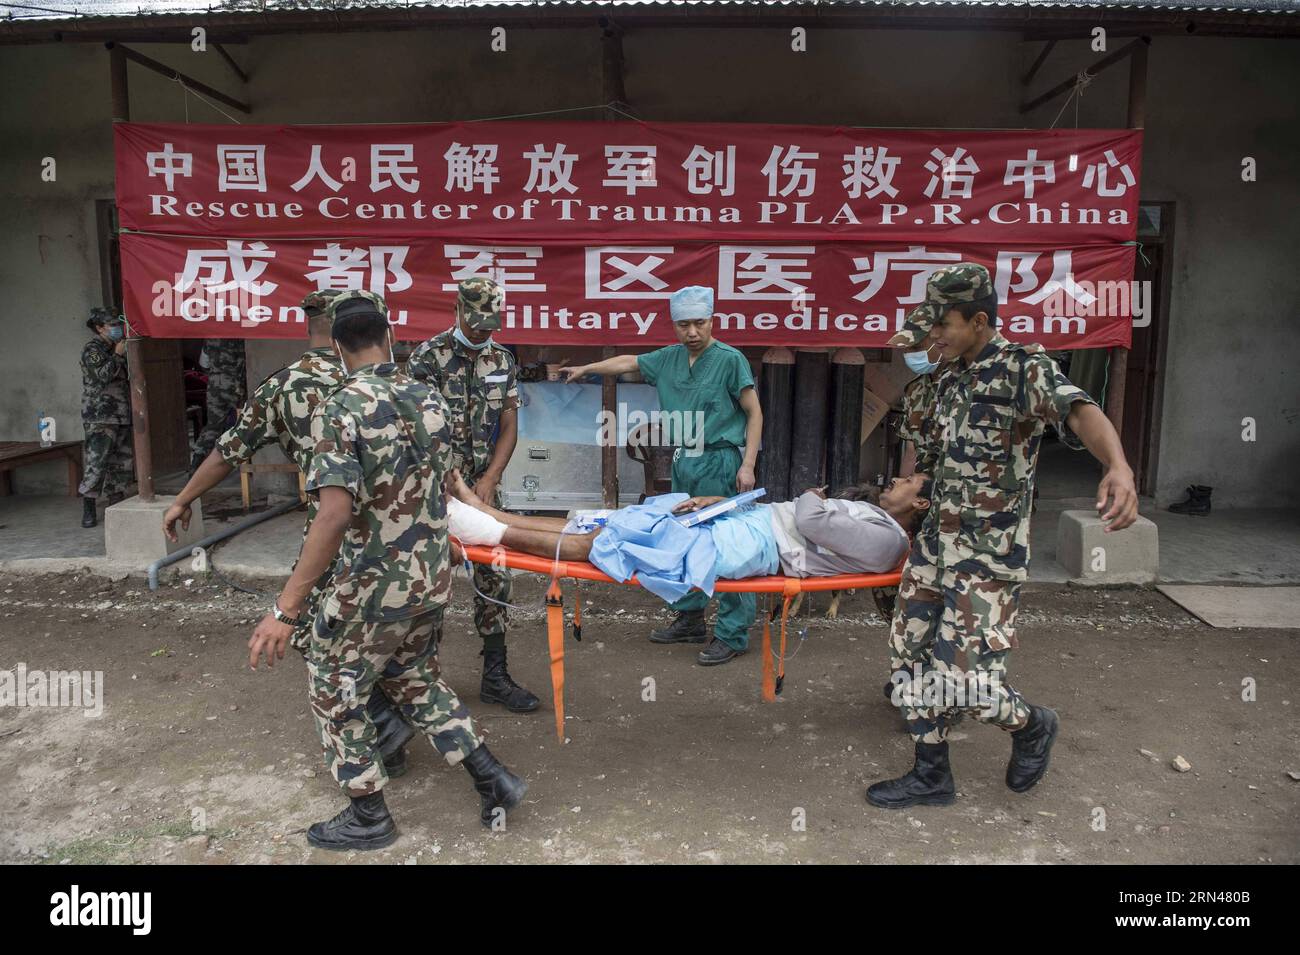 Members of China s Chengdu Military Region Medical Team transfer a patient to the intensive care unit after performing a surgery in Kathmandu, Nepal, May 10, 2015. Since the arrival, the Chengdu Military Region Medical Team, the only foreign aid team capable of performing full-spectrum bone- related surgical operations, has treated over 200 patients, conducted more than 100 surgical operations, including 34 major ones. The team has also provided psychological counseling to nearly 500 people, and has disinfected a total area of over 850,000 square meters. In contrast to their typical Internatio Stock Photo